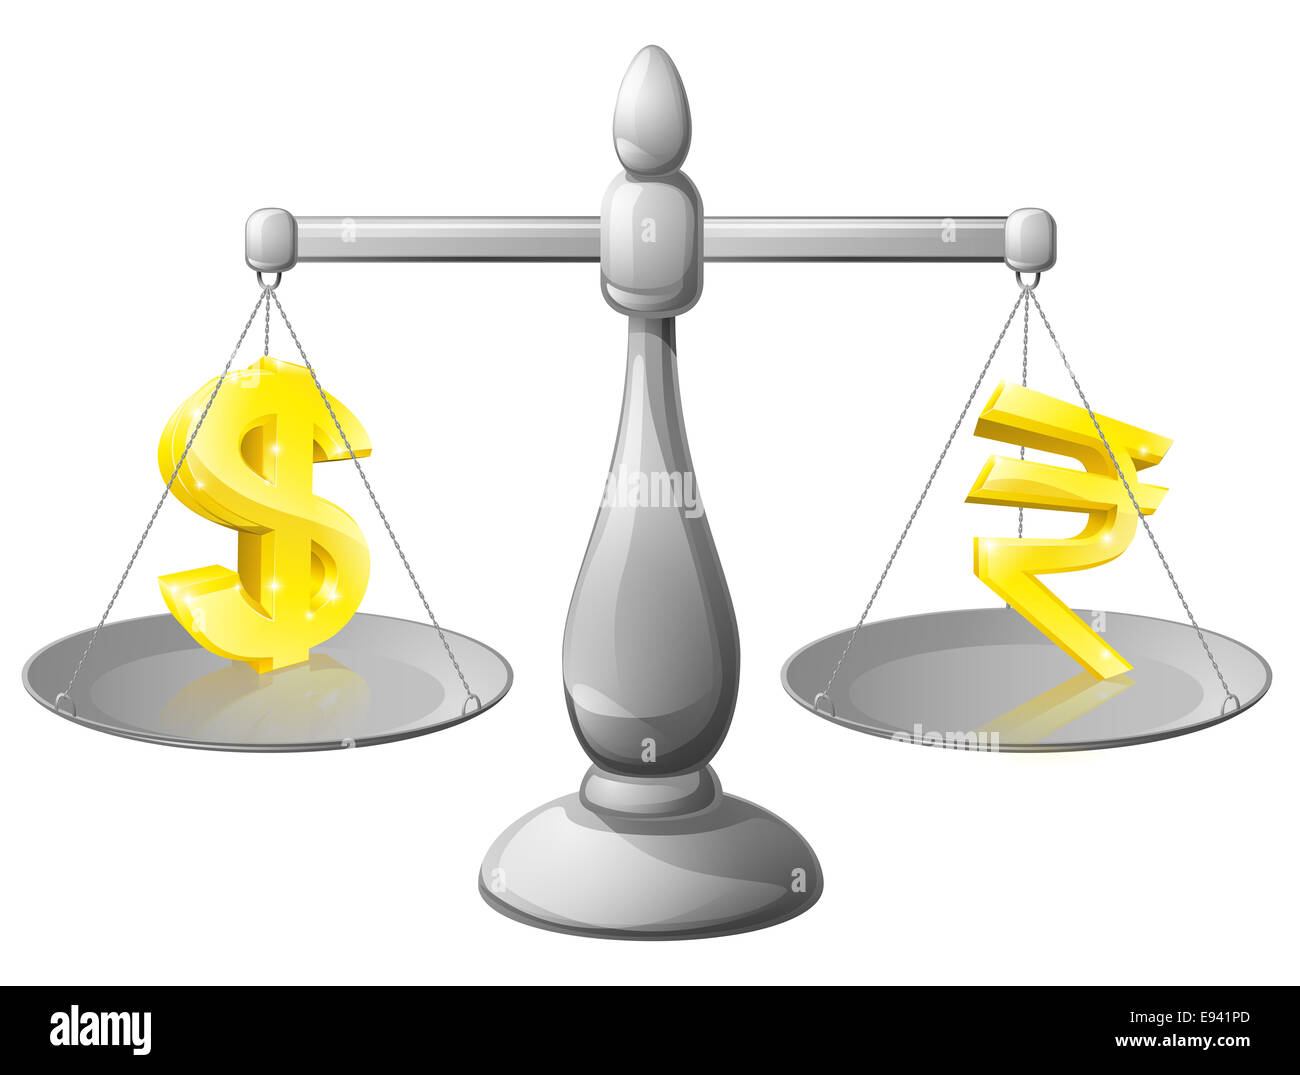 Scales currency concept, foreign exchange forex concept, dollar and rupee signs on scales being weighed against each other Stock Photo